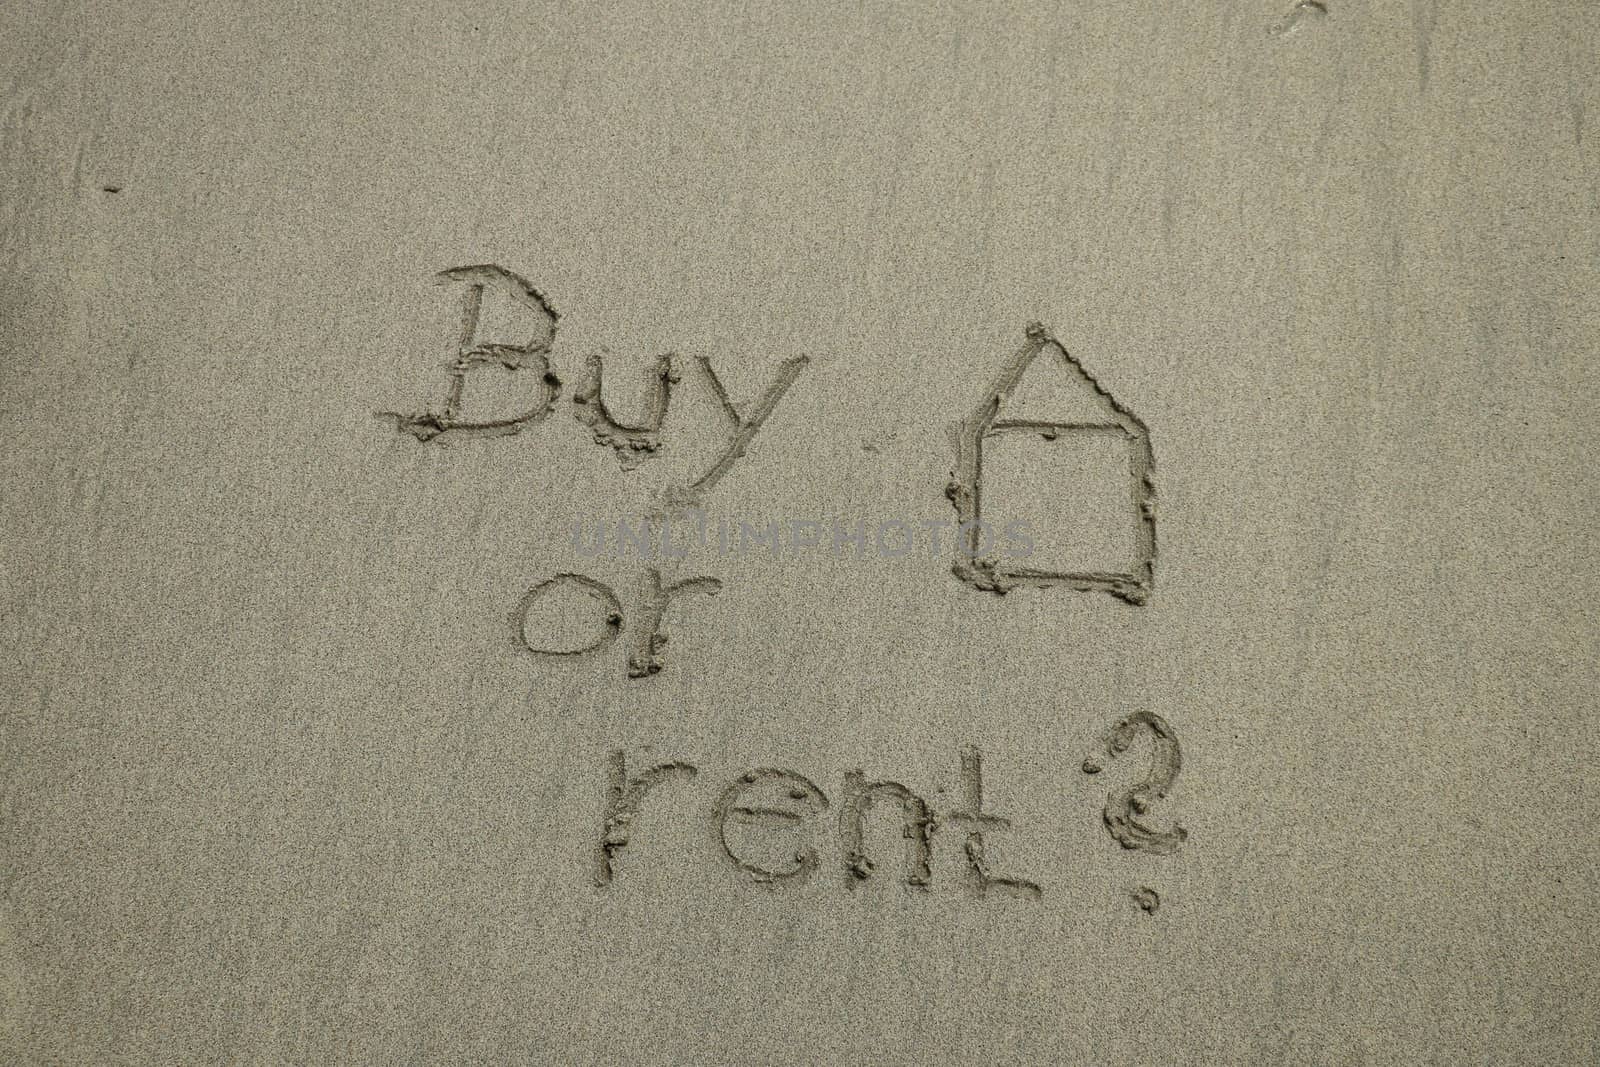 buy or rent concept, text on the sand, real estate. The sign written on sand.